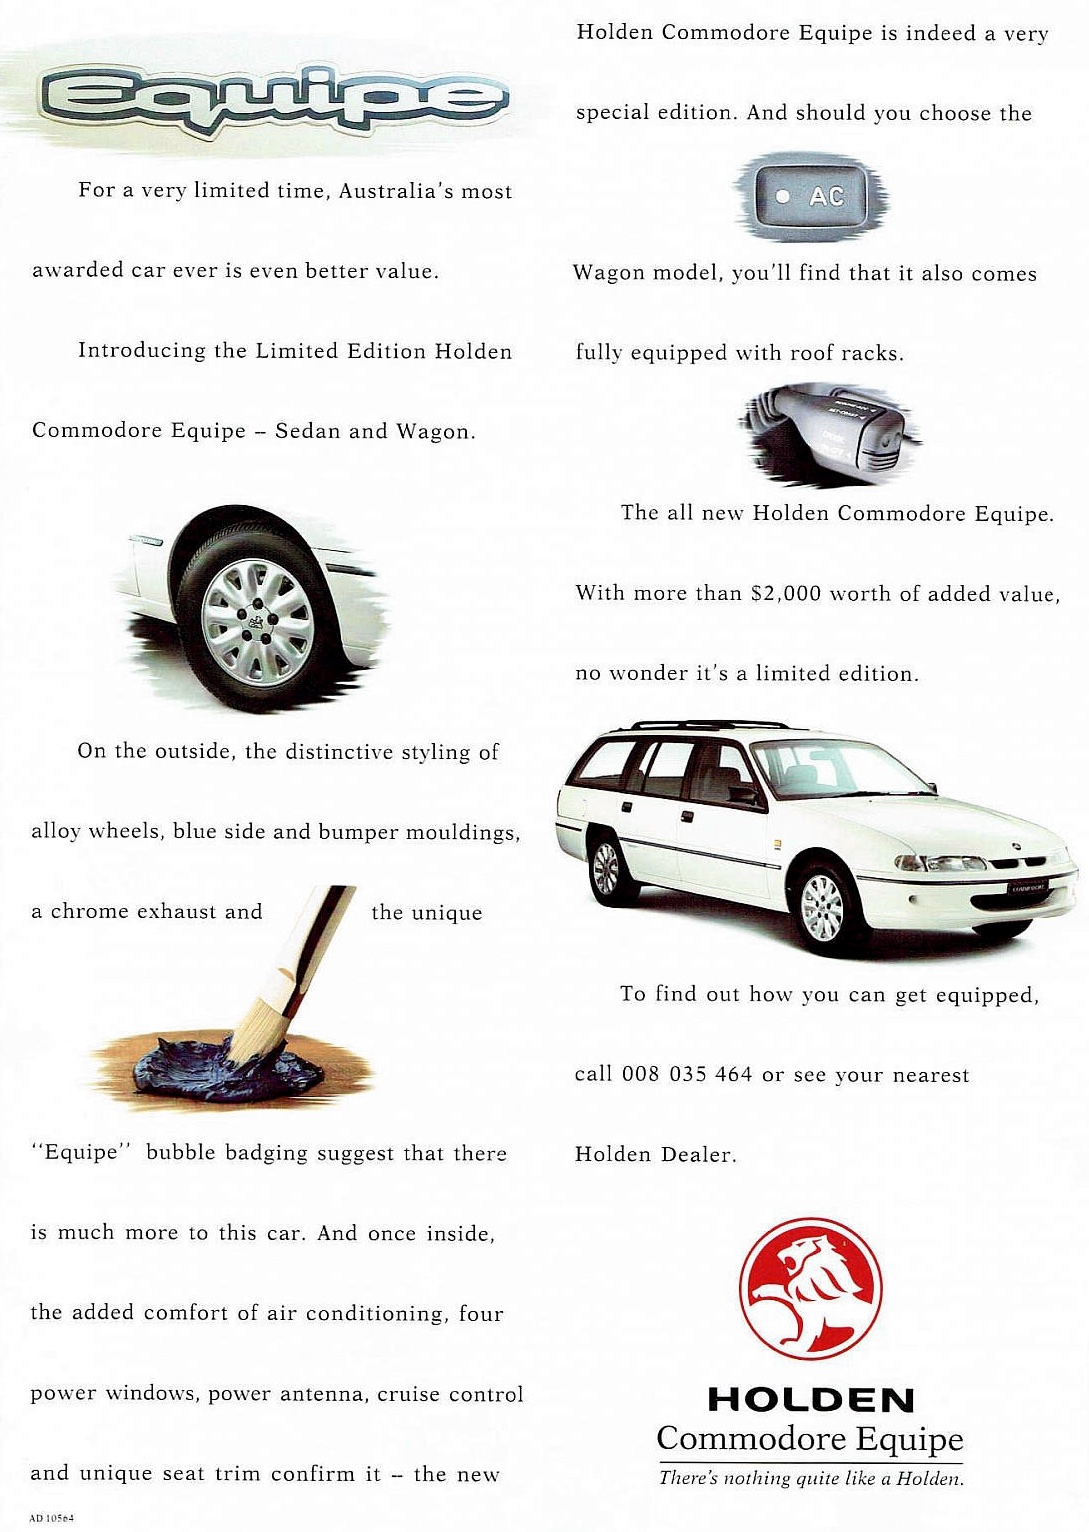 1995 Holden VR Commodore Series II Equipe Brochure Page 1